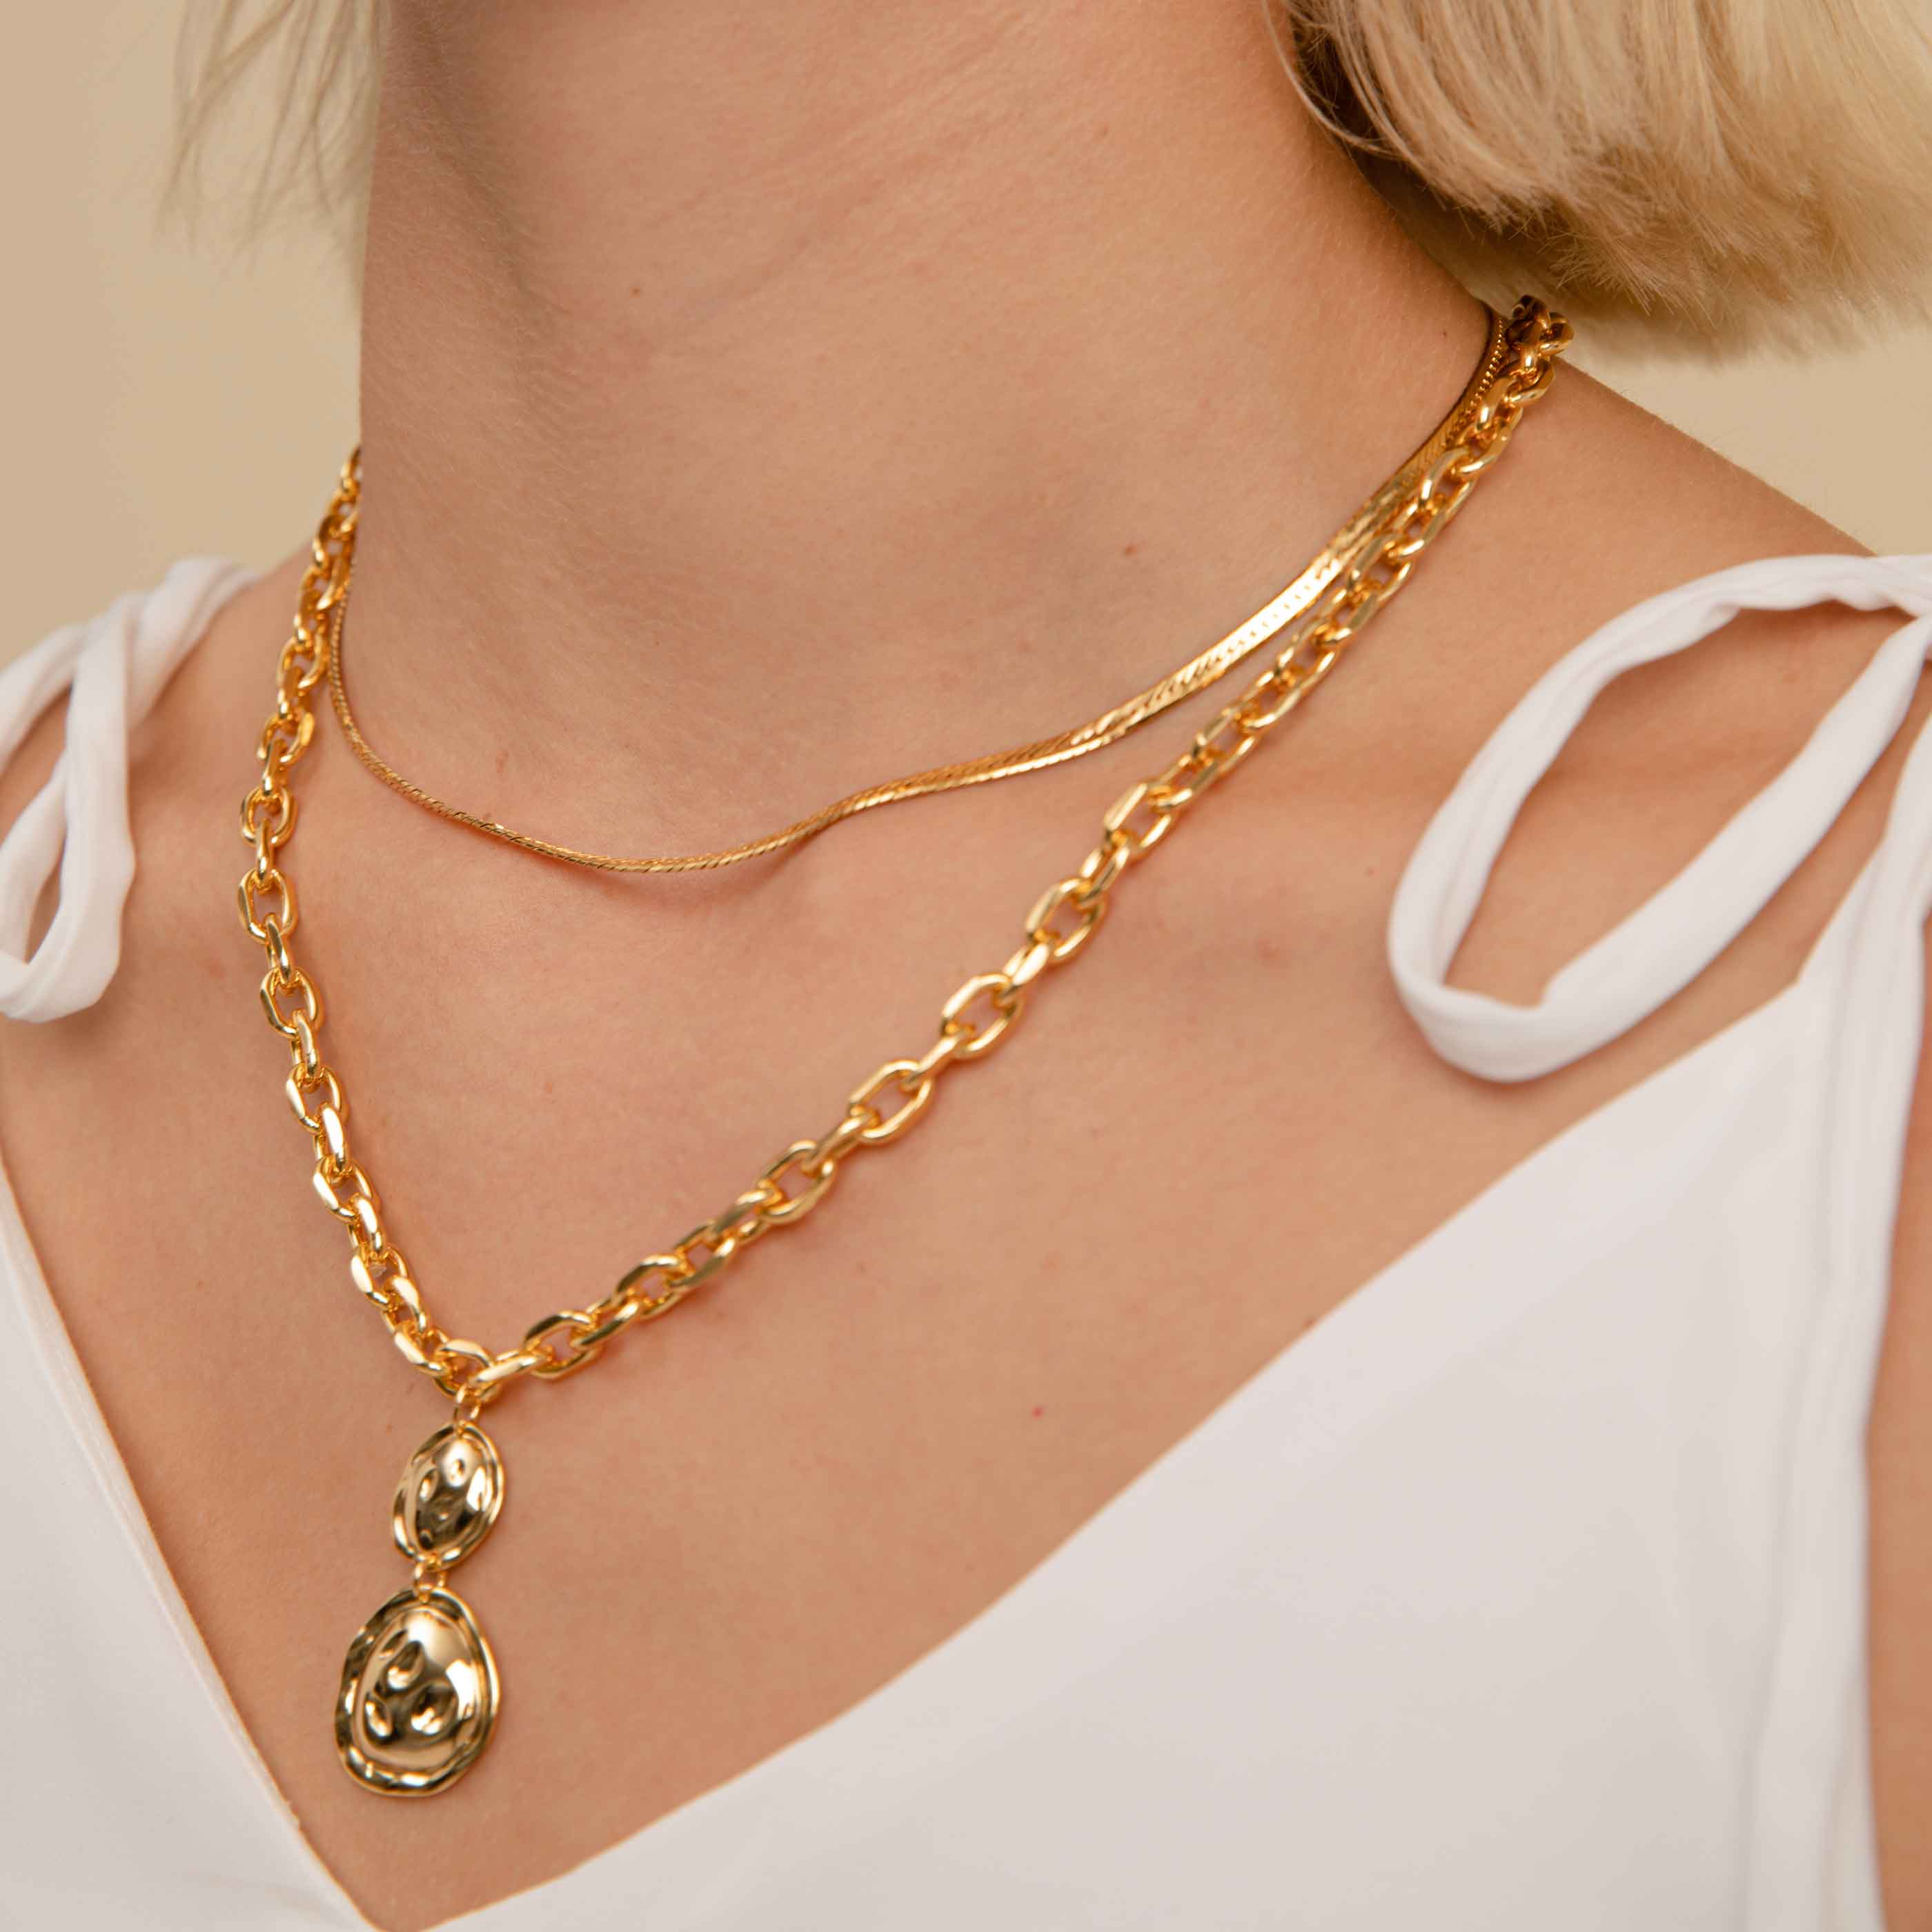 Snake Chain Necklace in Gold worn with chunky pendant necklace